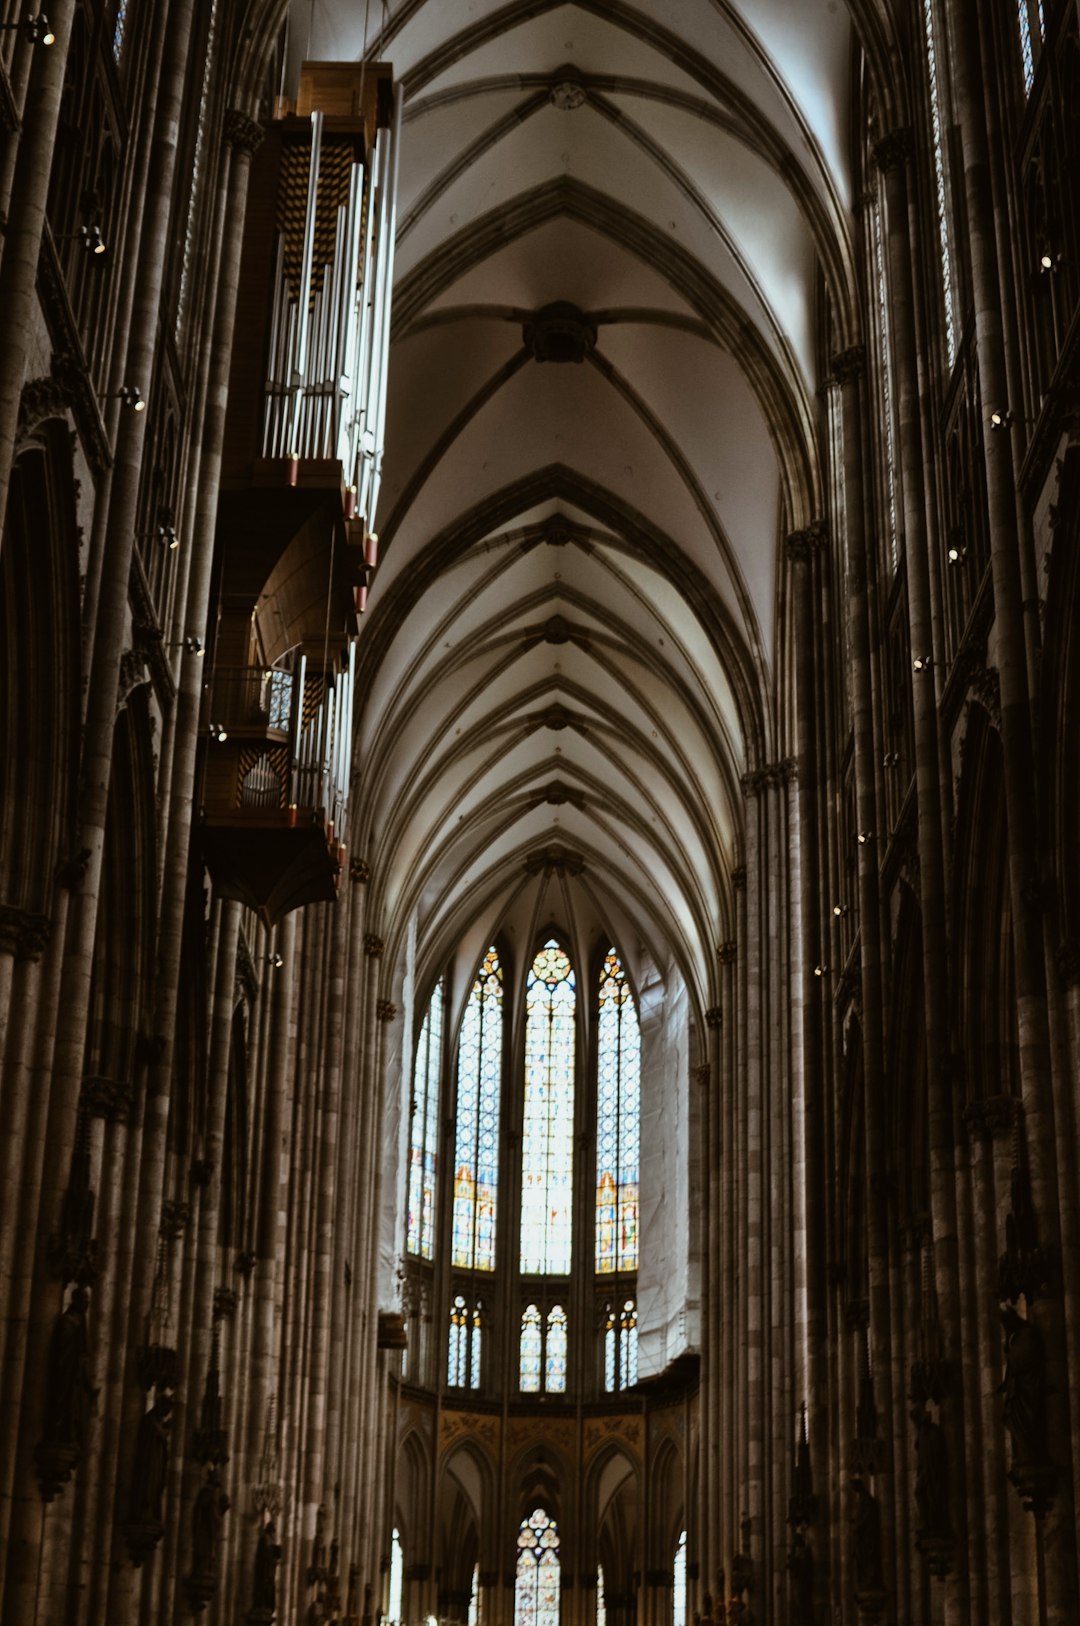 Travel Tips and Stories of Kölner Dom in Germany